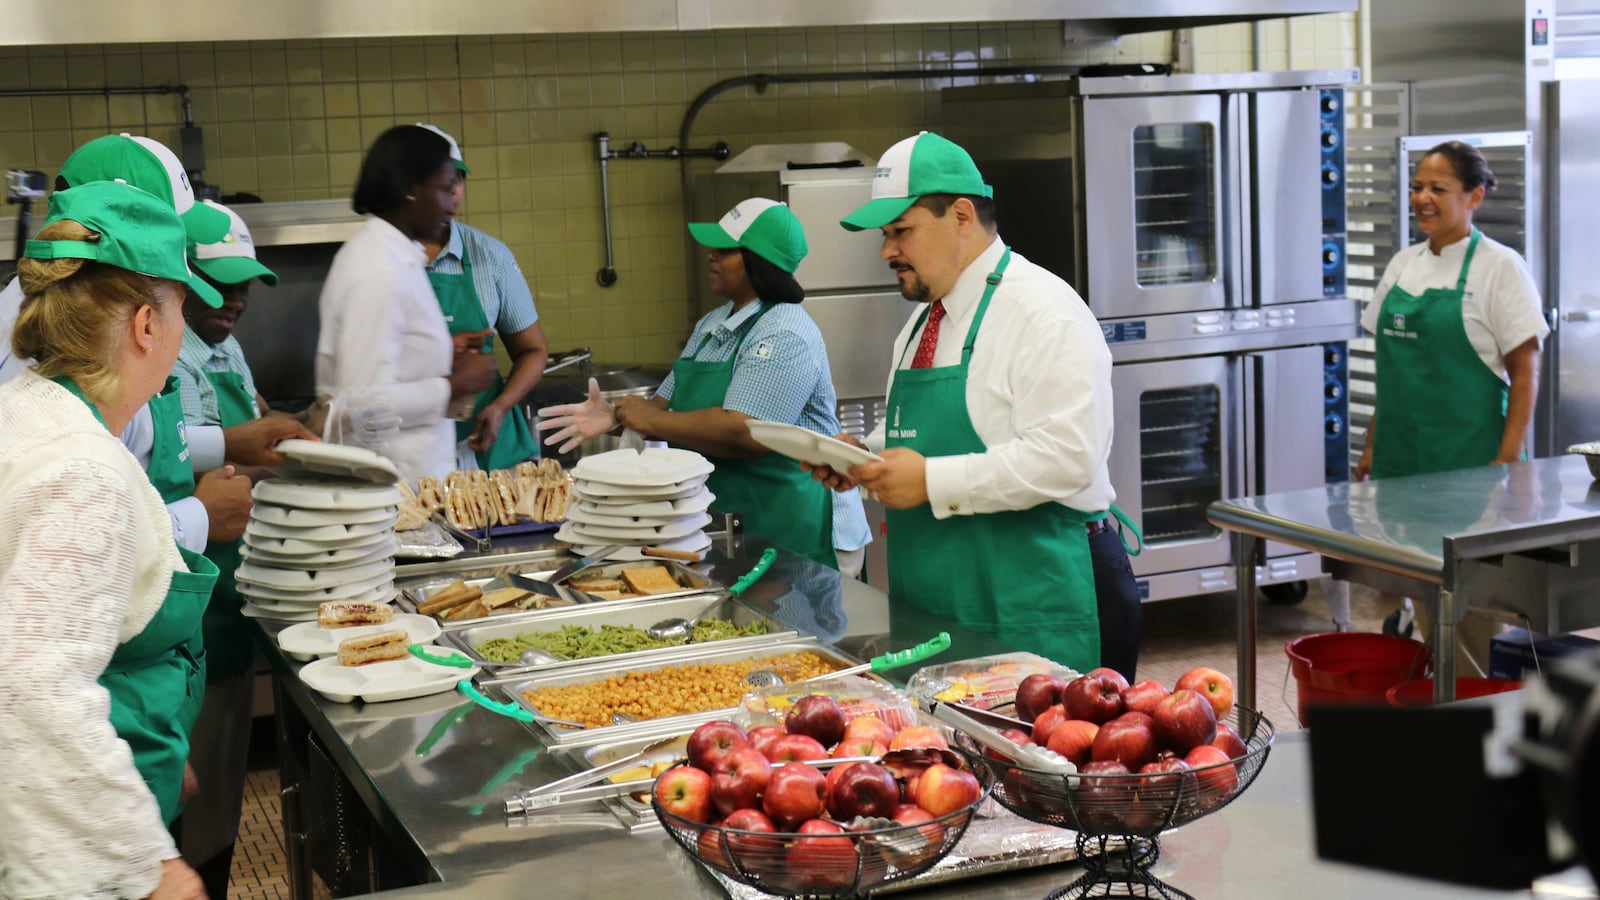 Schools Chancellor Richard Carranza and Manhattan Borough President Gale Brewer served lunch at P.S./I.S. 180 in Harlem on the first day of the 2018-2019 school year. Mayor Bill de Blasio has warned that federal funding for school food could end in April if the government shutdown drags on.